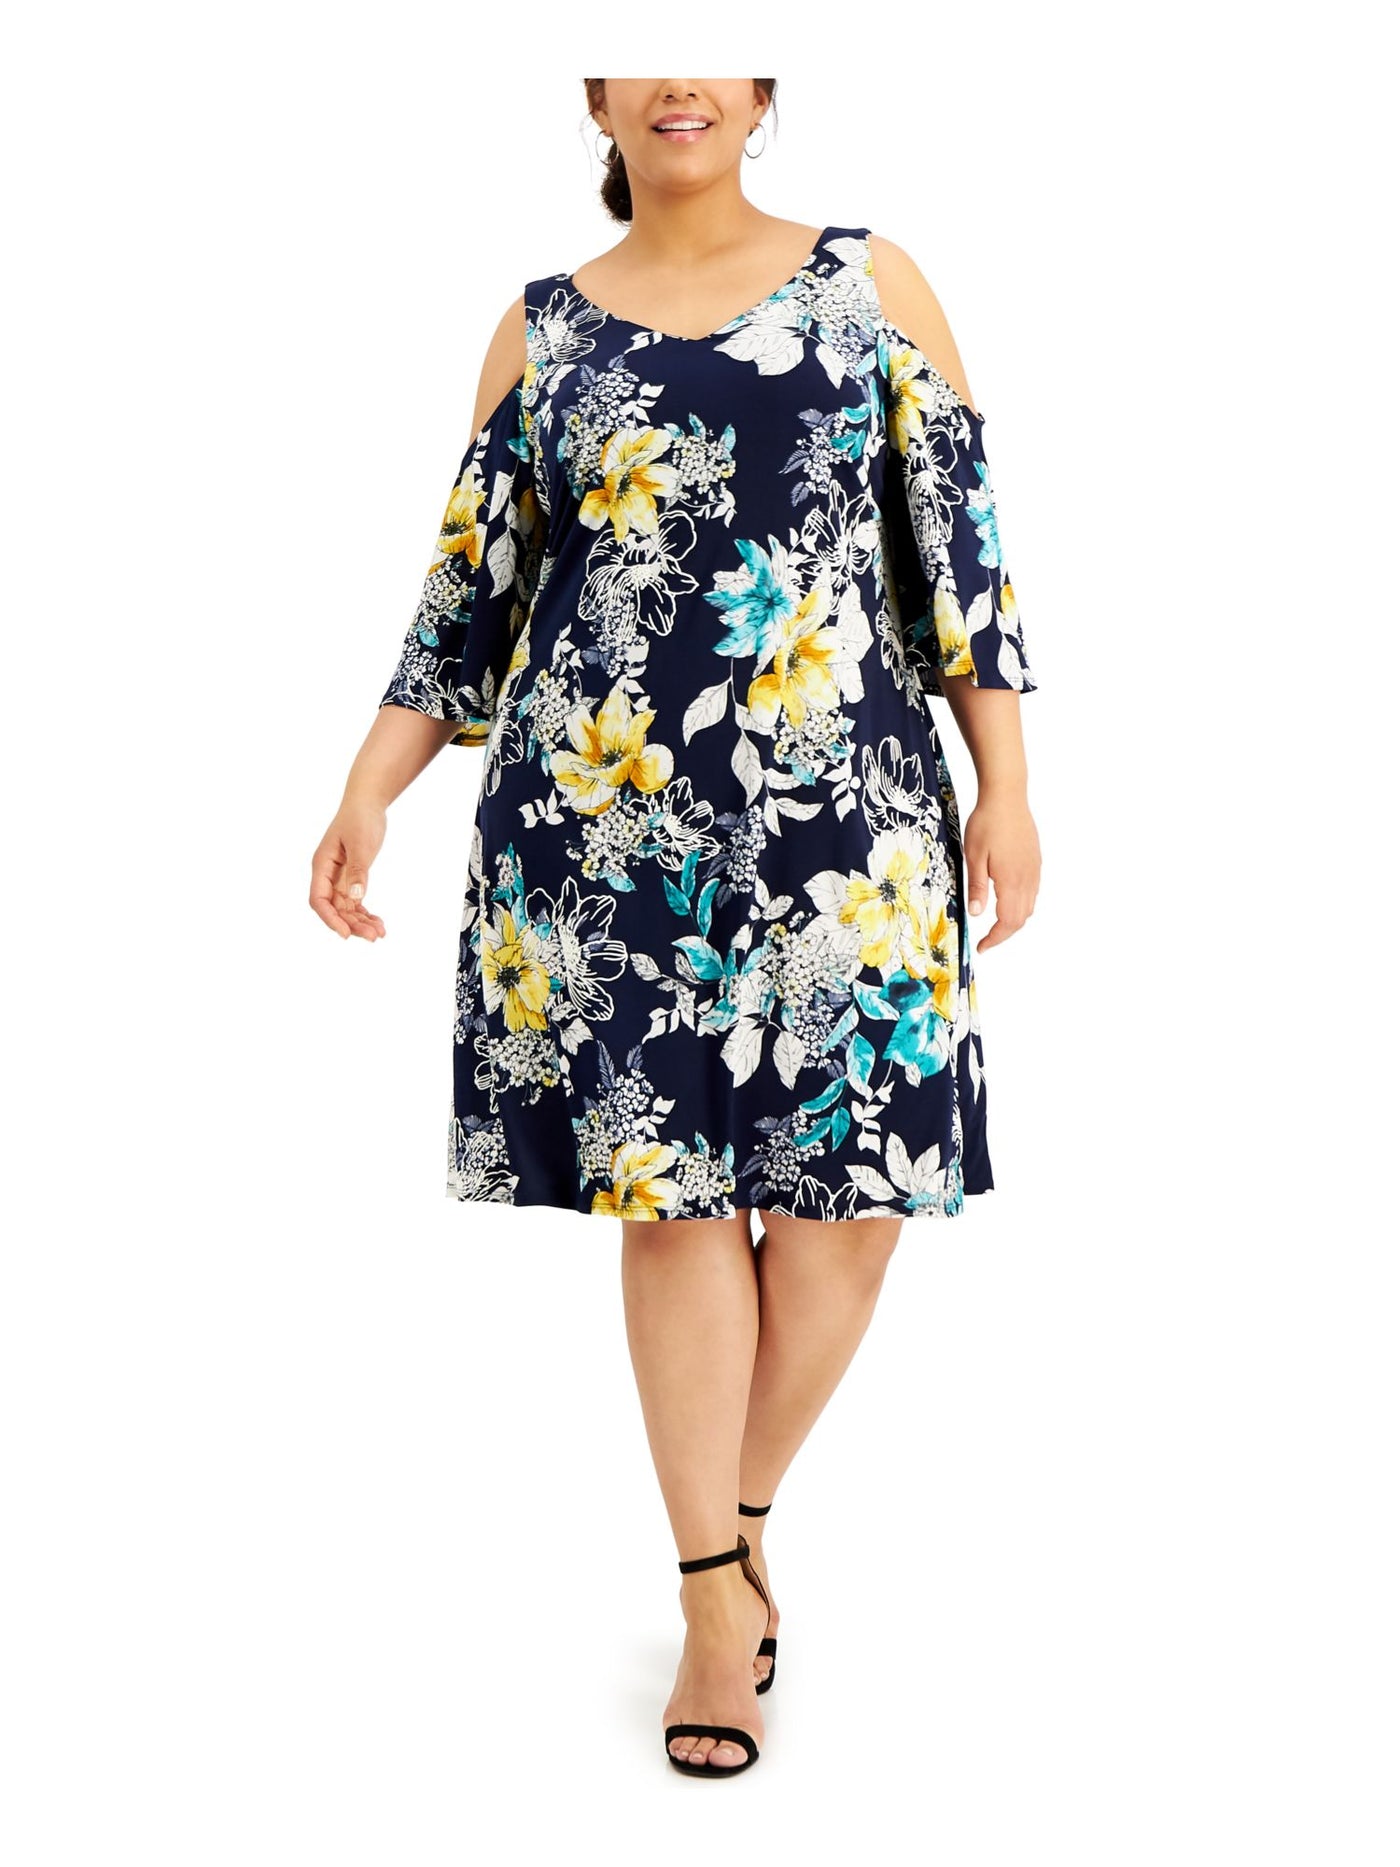 CONNECTED APPAREL Womens Navy Stretch Floral 3/4 Sleeve V Neck Short Wear To Work Shift Dress Plus 20W